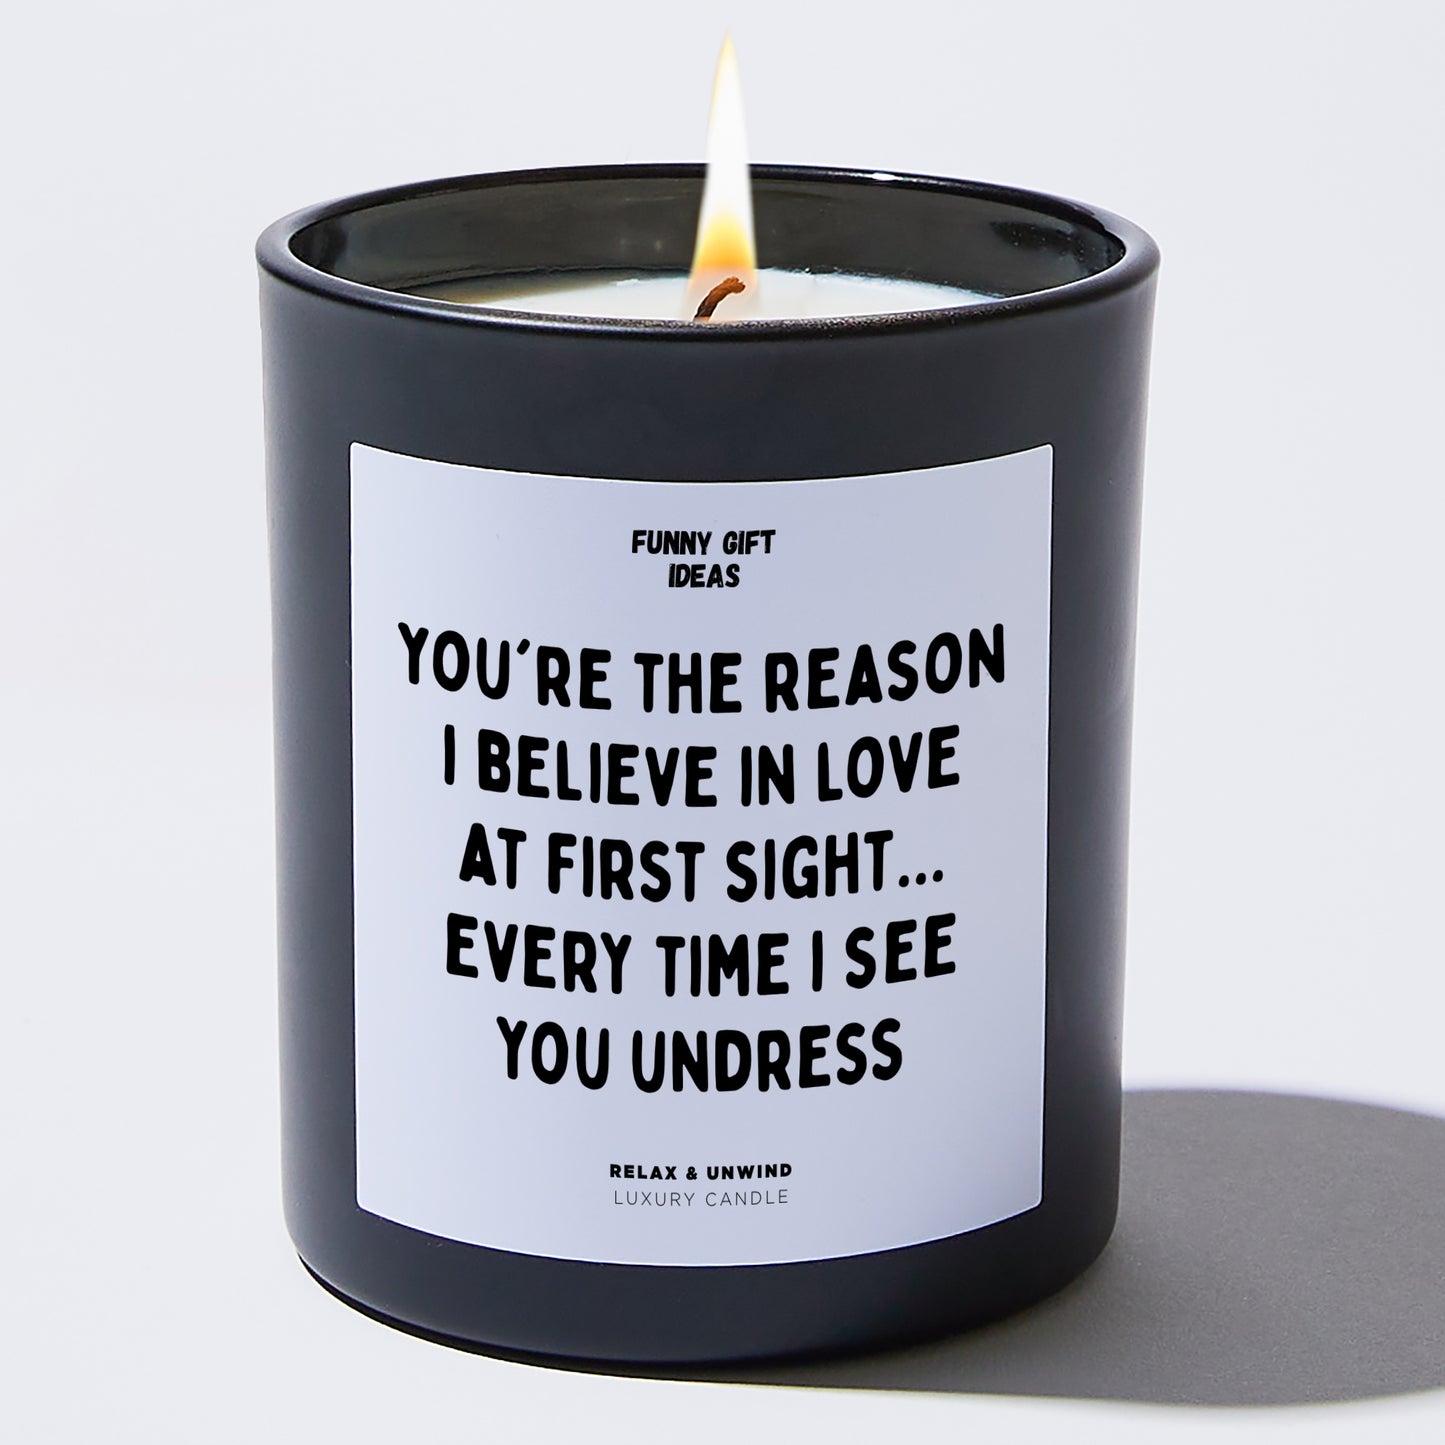 Anniversary You're the Reason I Believe in Love at First Sight... Every Time I See You Undress. - Funny Gift Ideas